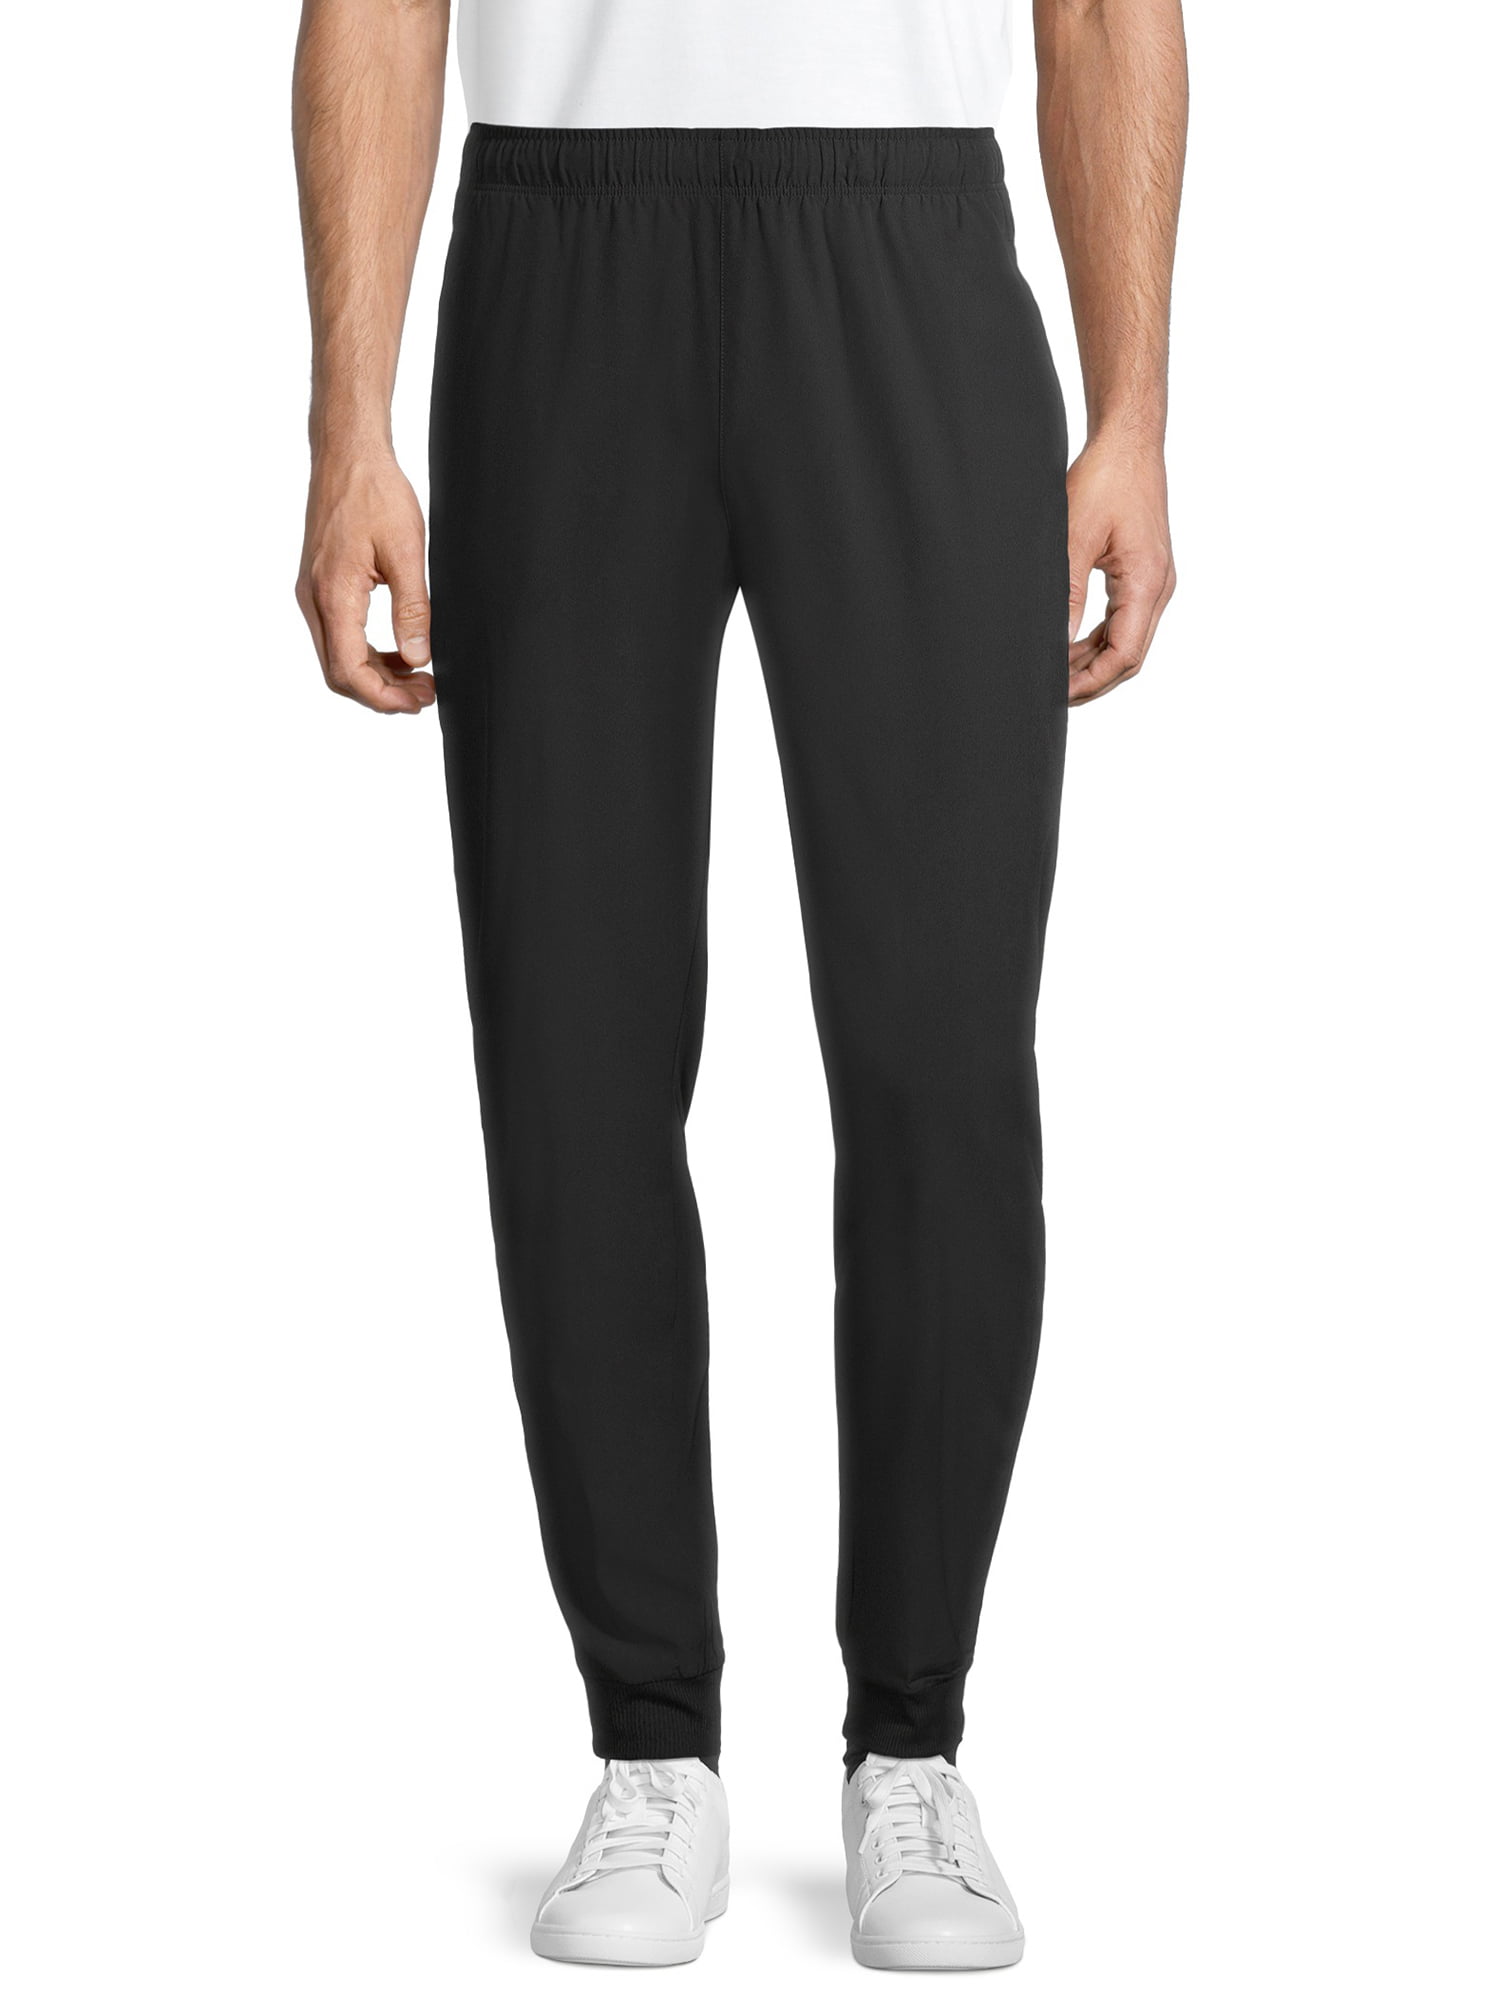 Layer 8 - Layer 8 Men's Woven Stretch Athletic Joggers - Walmart.com ...